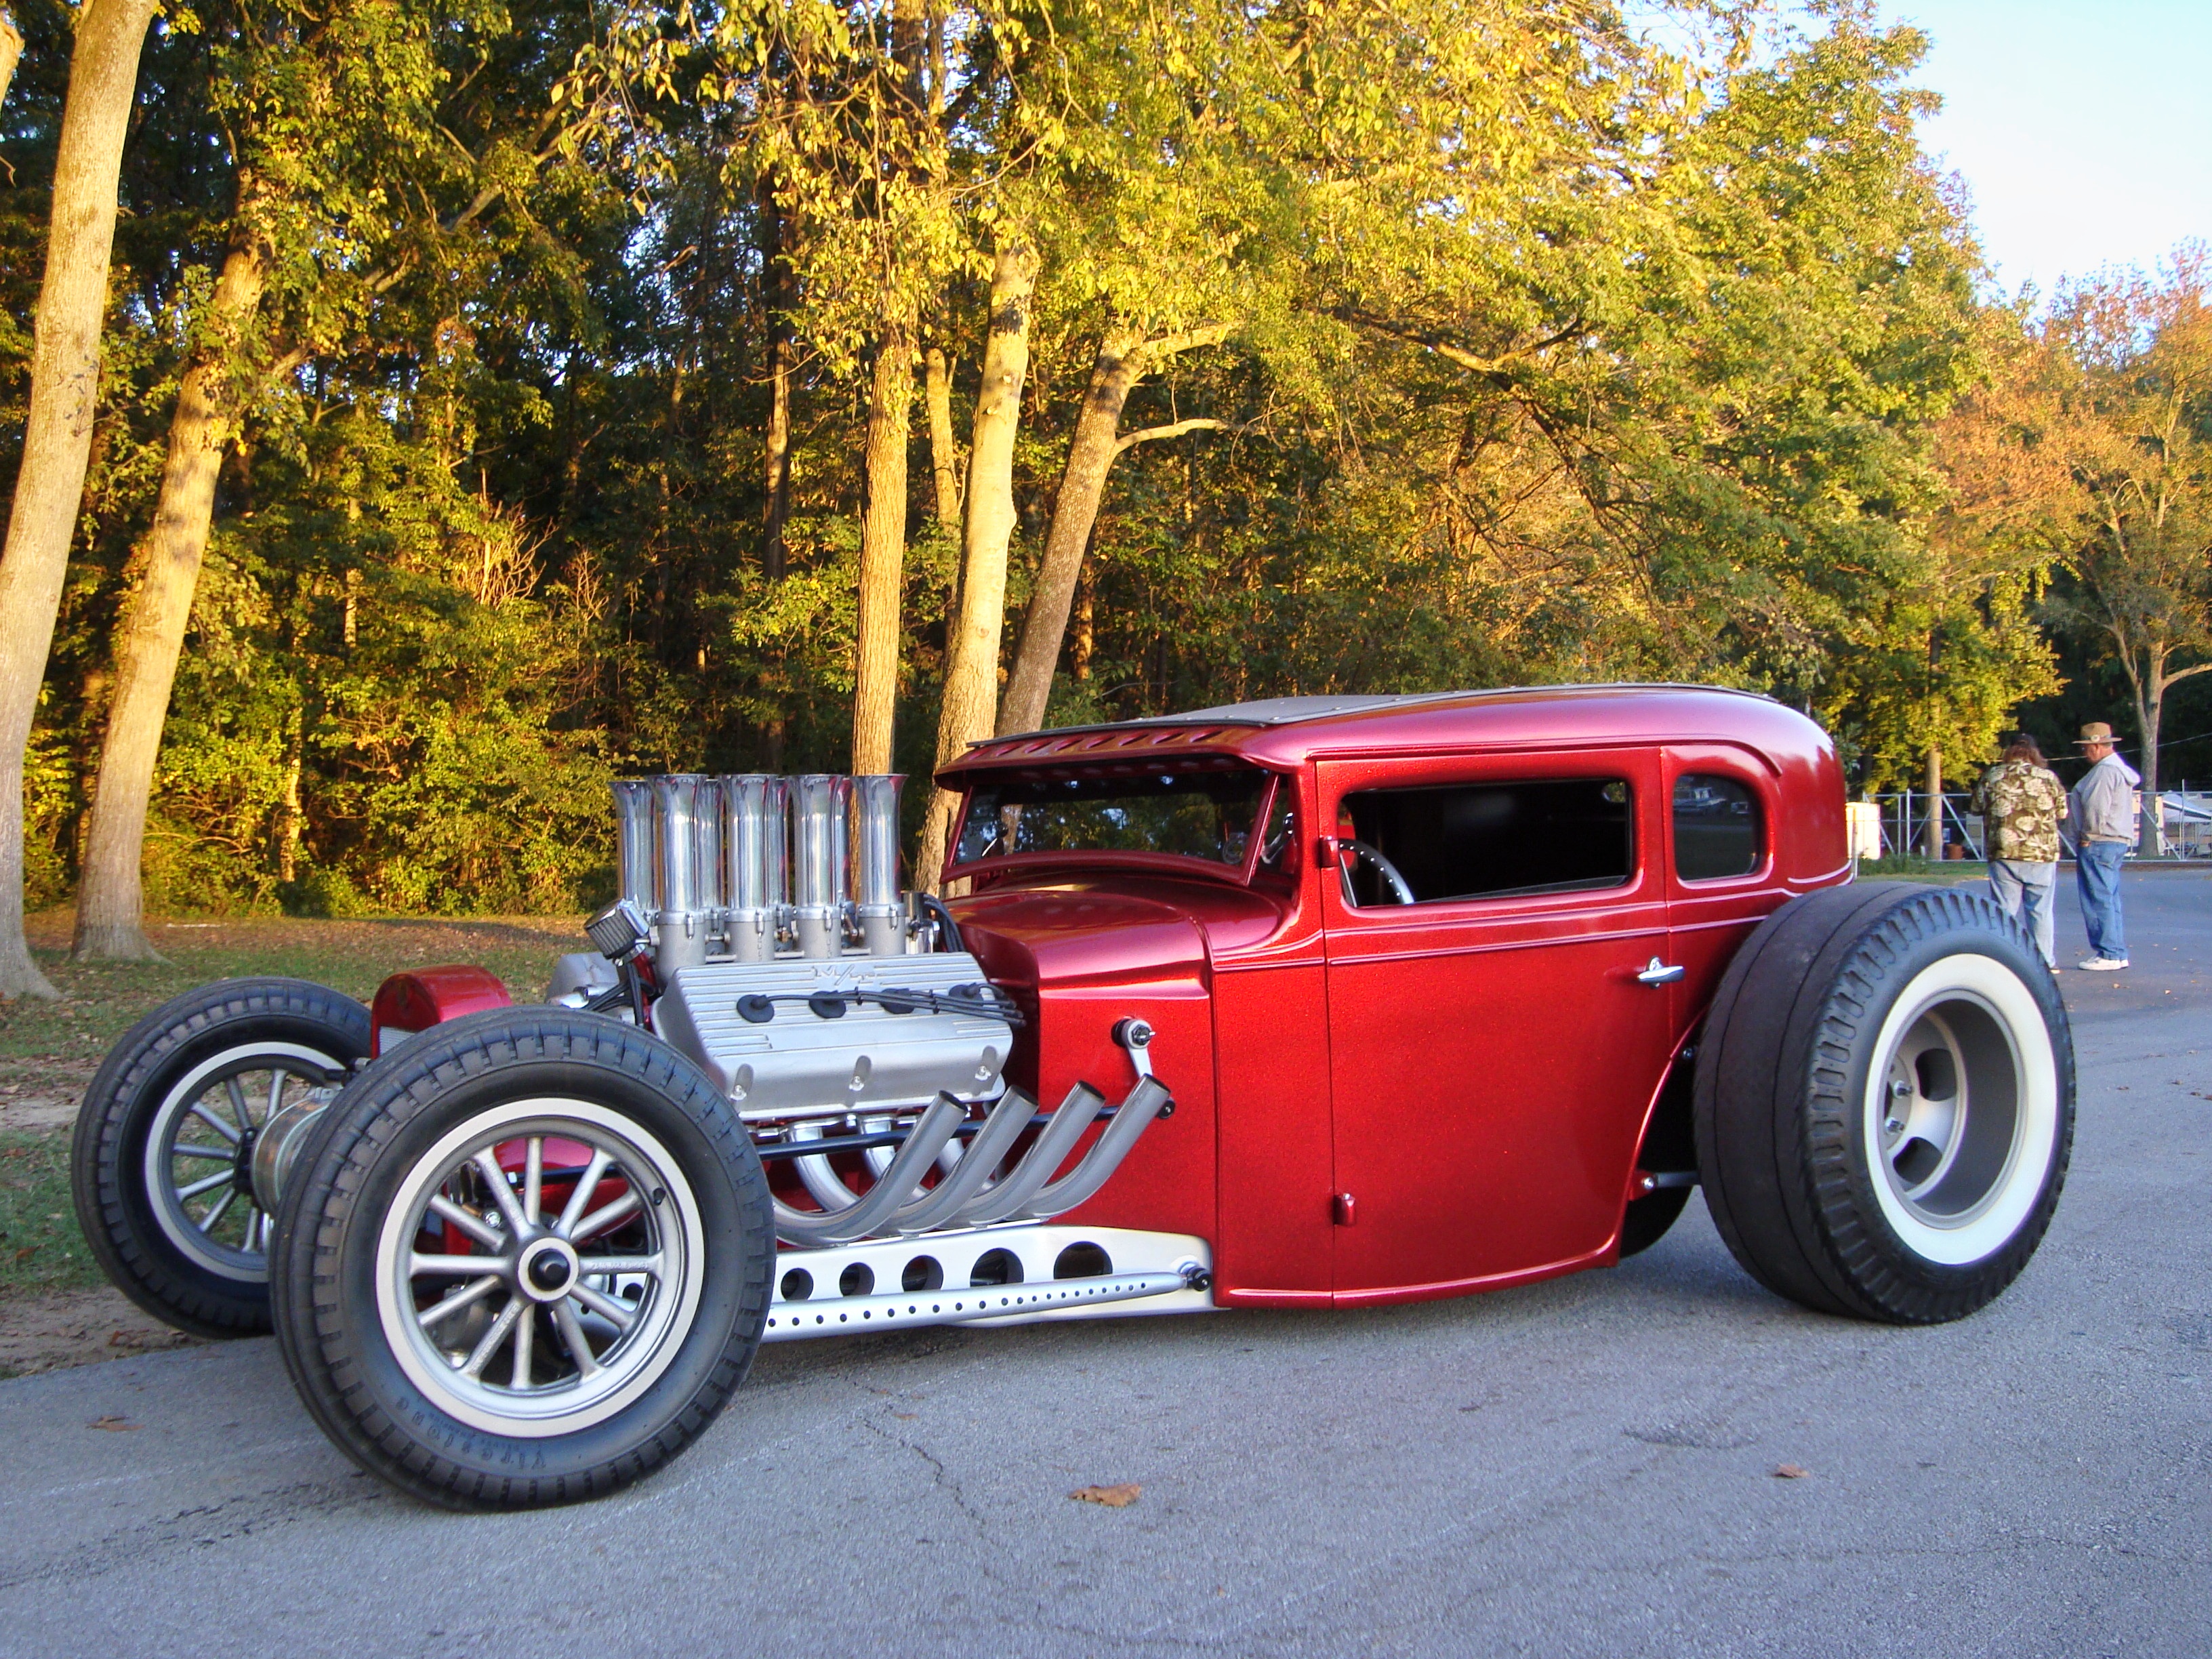 Hot Rod Vancouver